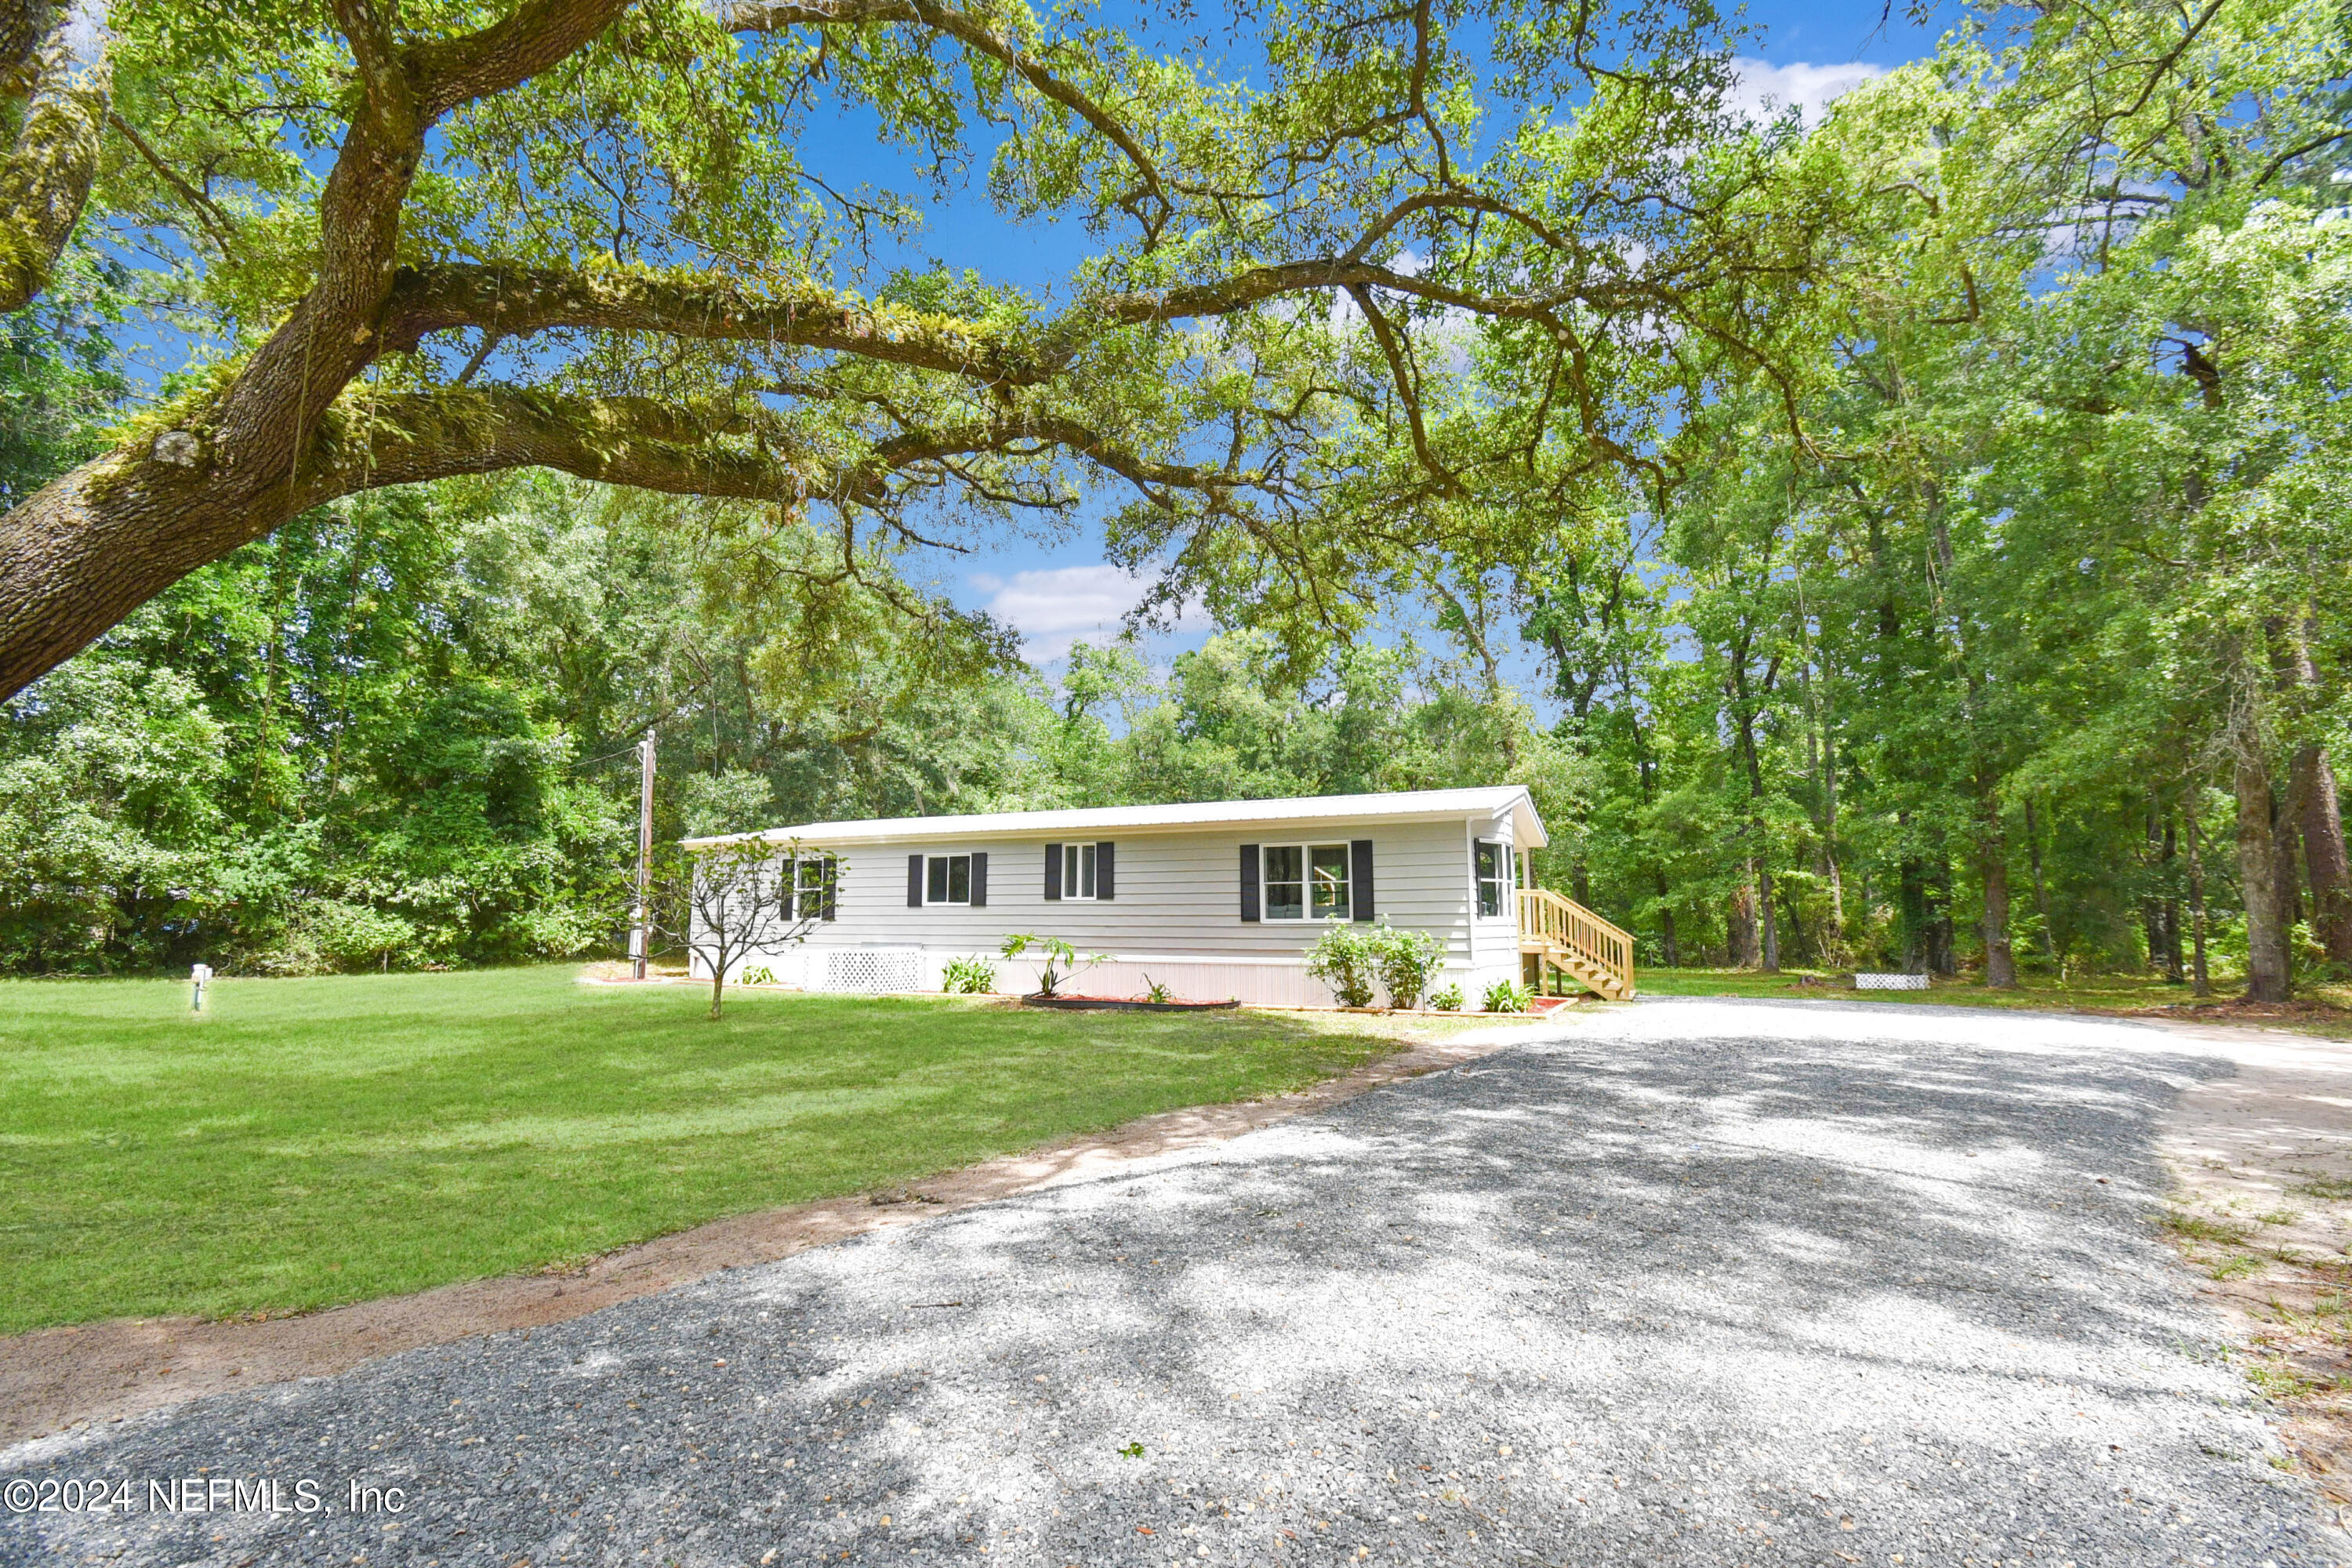 Middleburg, FL home for sale located at 4162 Saunders Drive, Middleburg, FL 32068